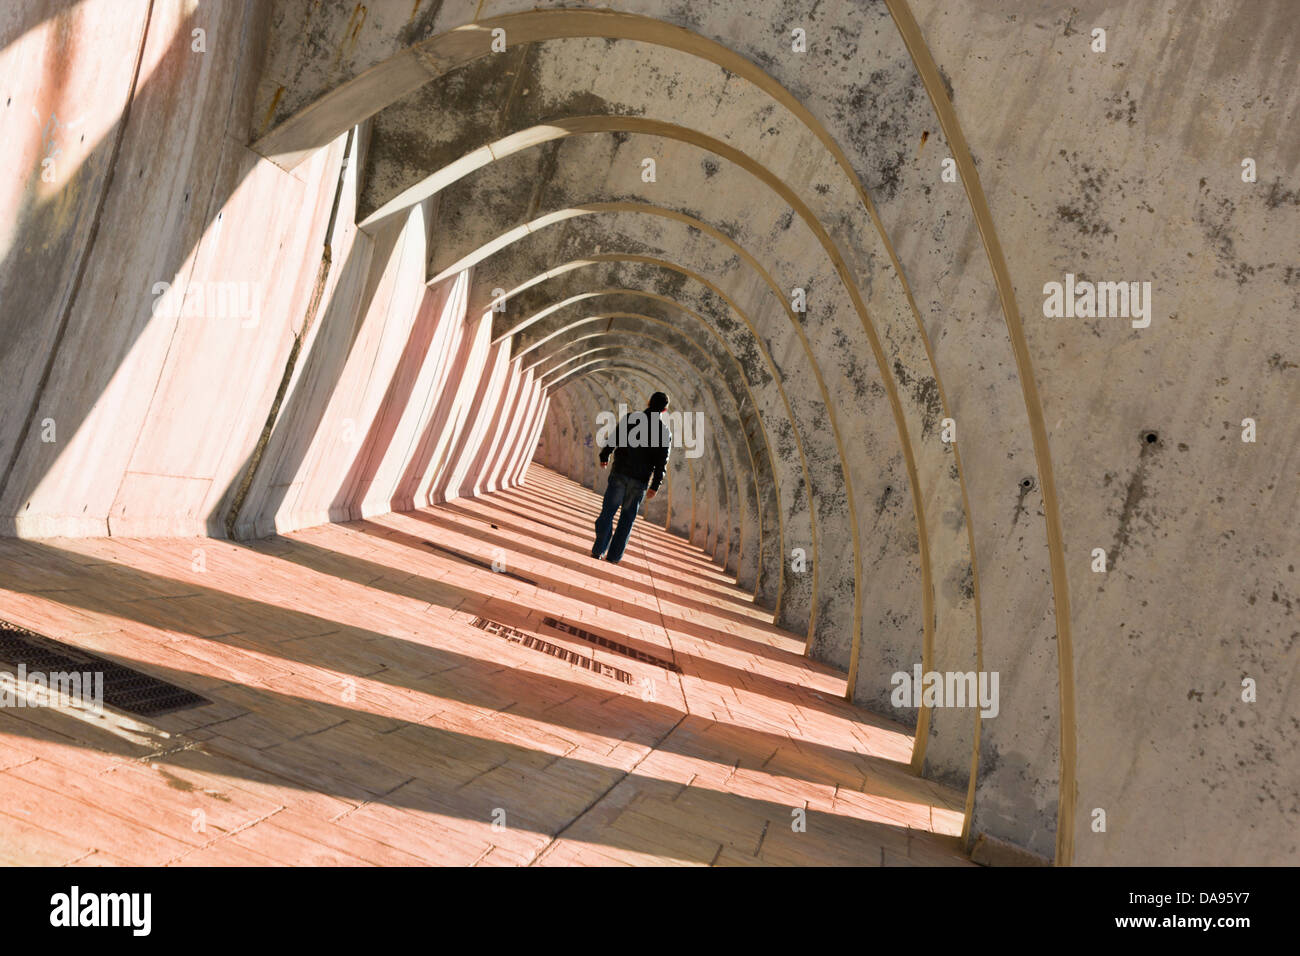 Mysterious man walking under arched walkway. Stock Photo